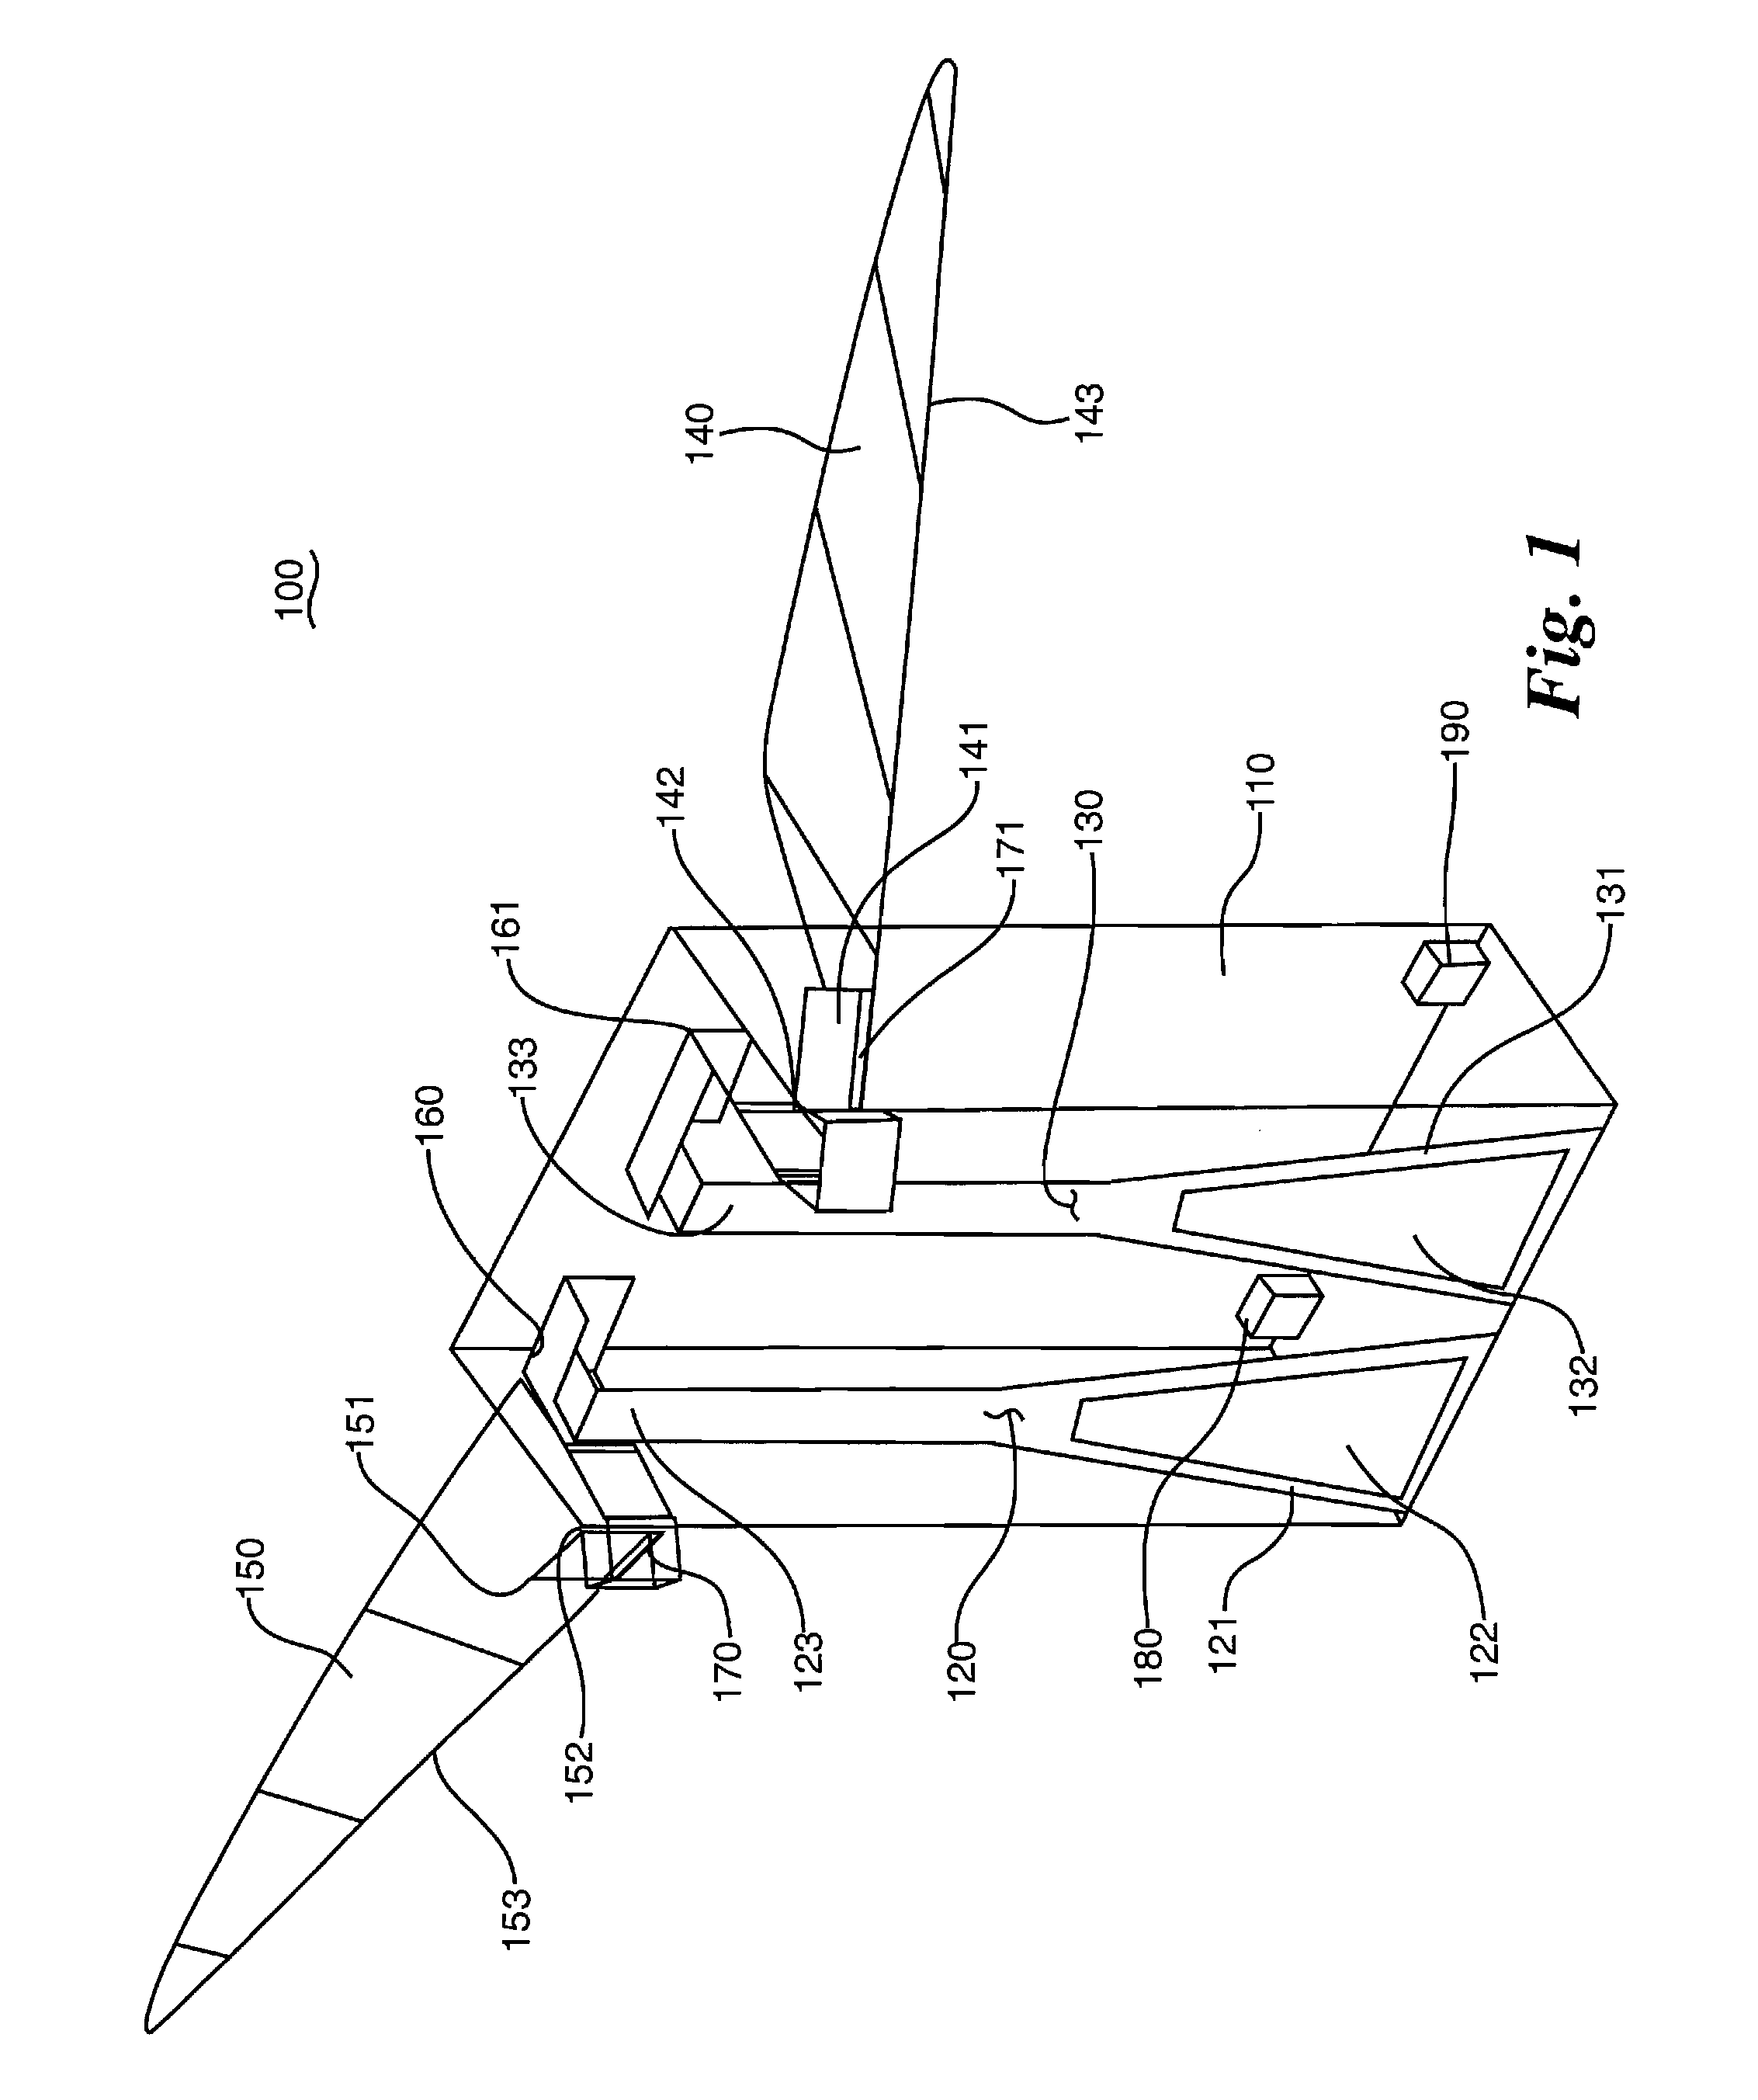 Method for shaping wing velocity profiles for control of flapping wing micro air vehicles